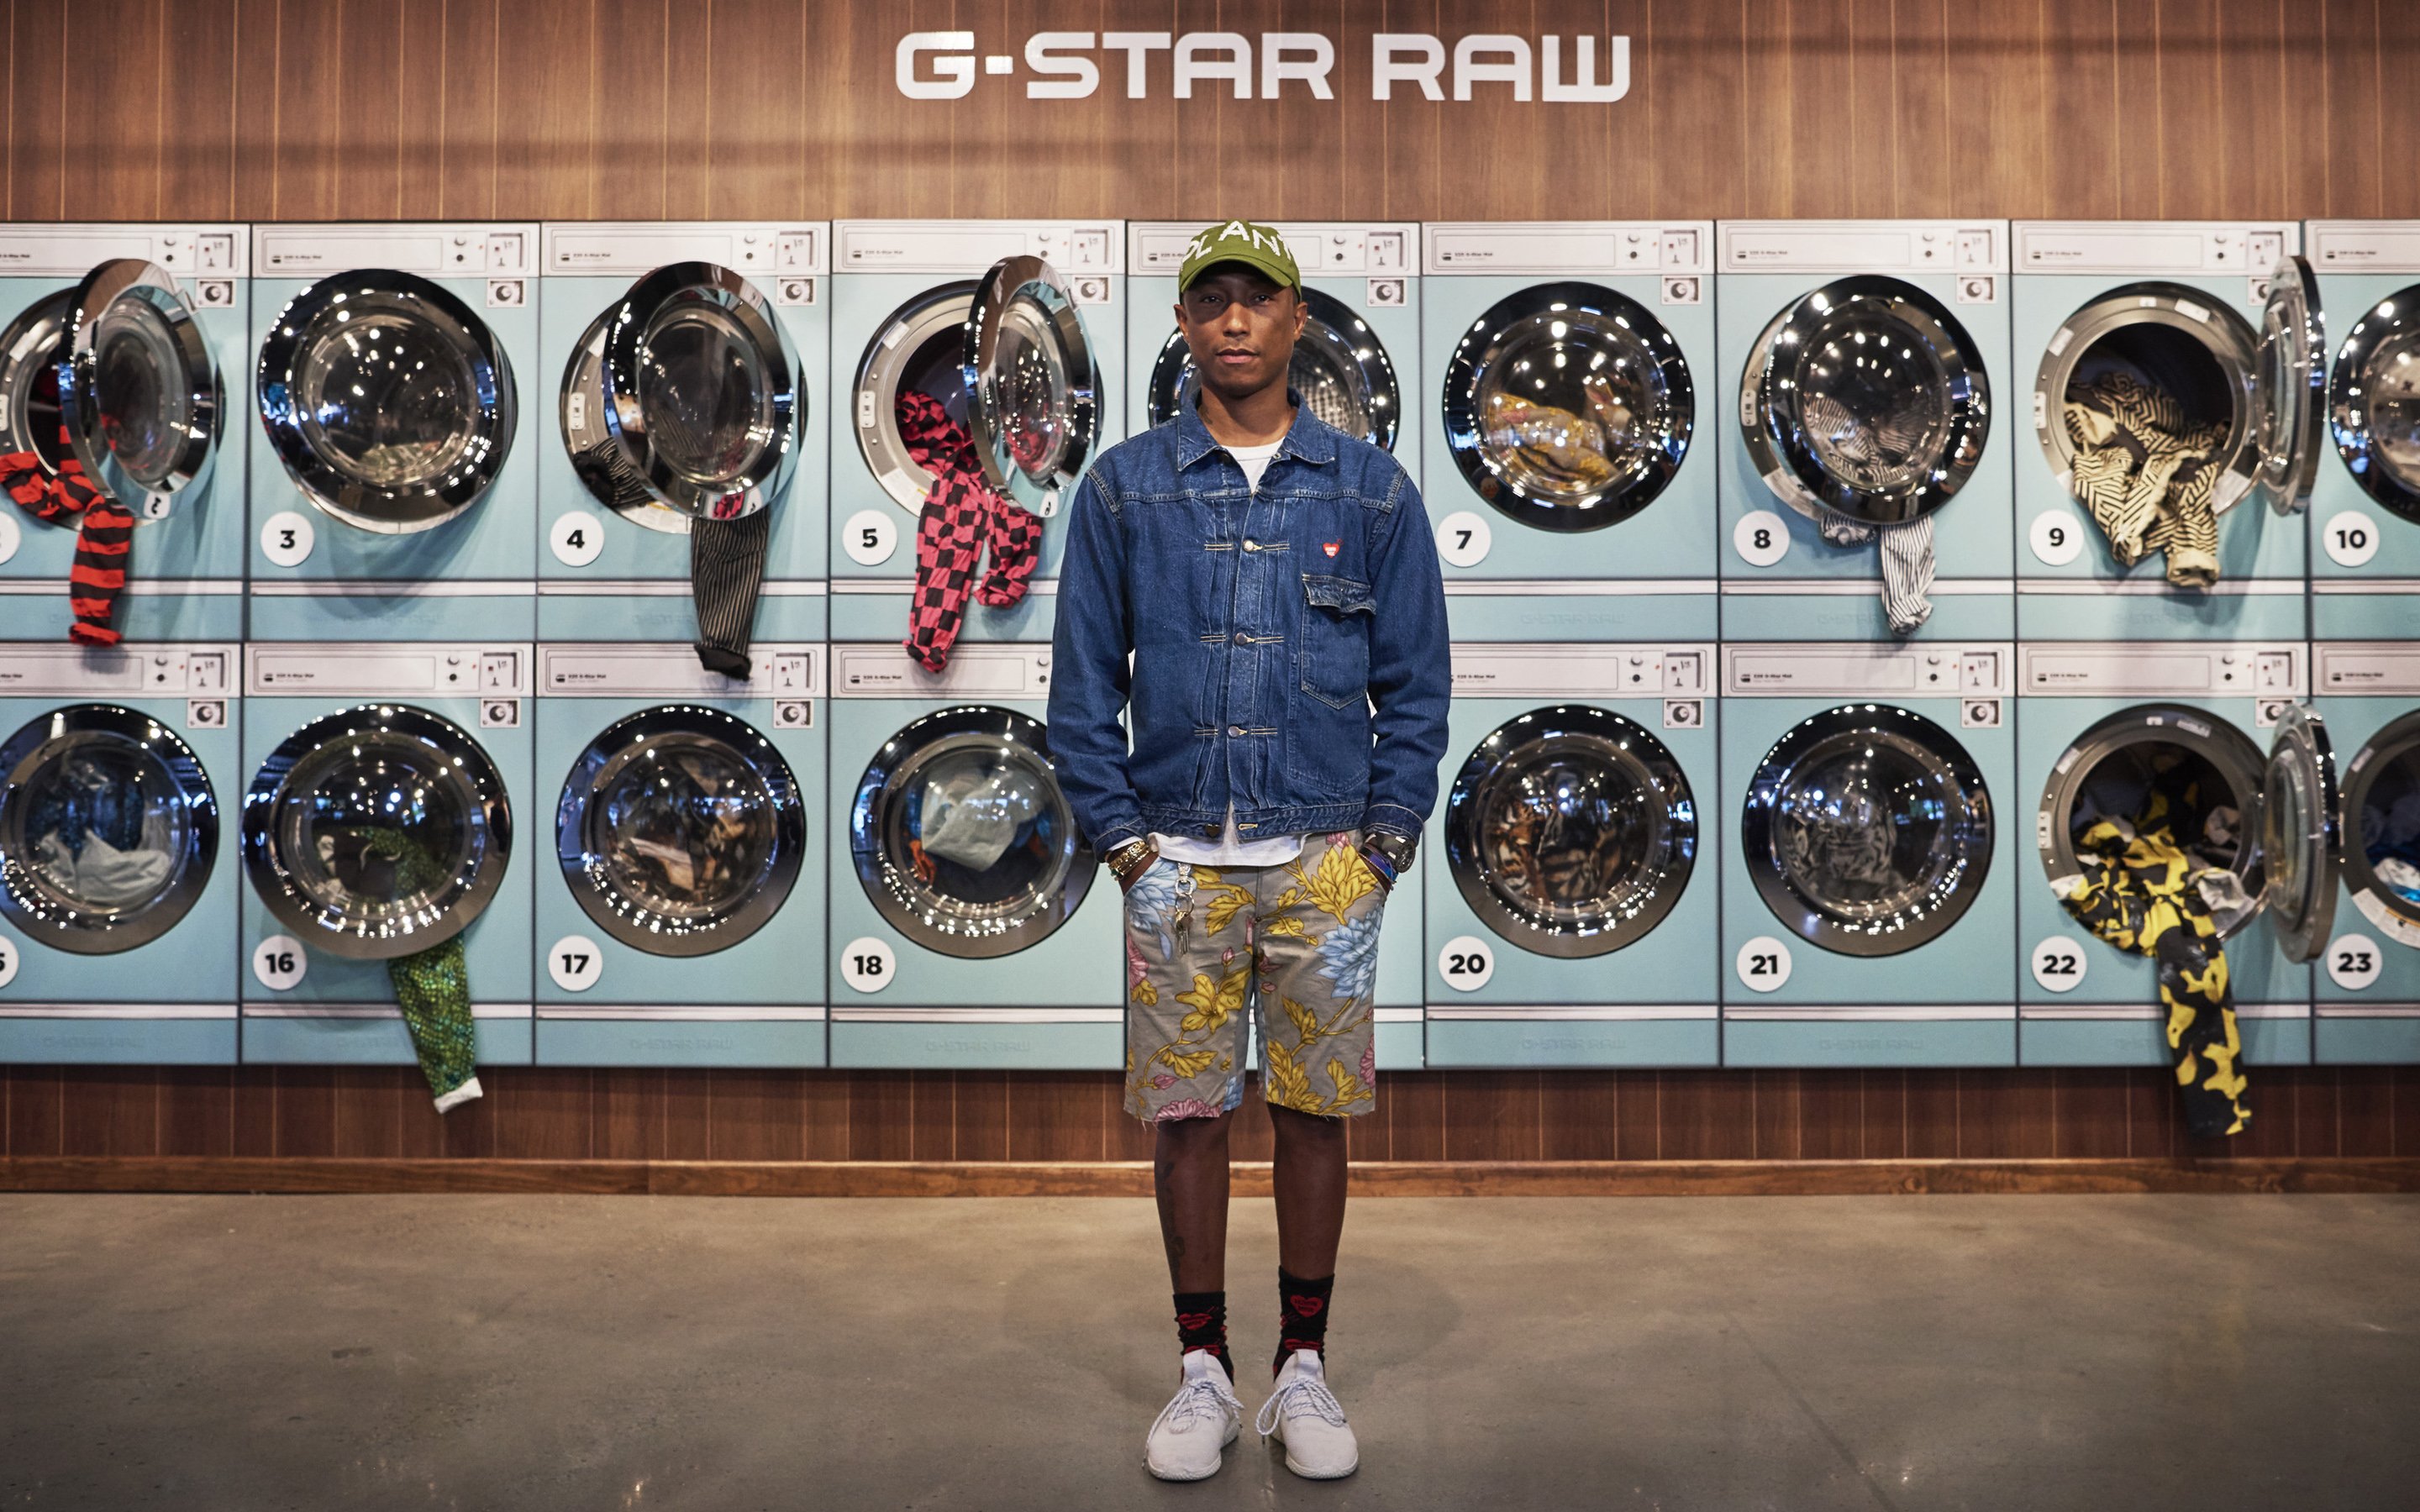 Download Wallpaper Pharrell Williams, American Singer, Laundry, American Rapper, G Star Raw For Desktop With Resolution 2880x1800. High Quality HD Picture Wallpaper